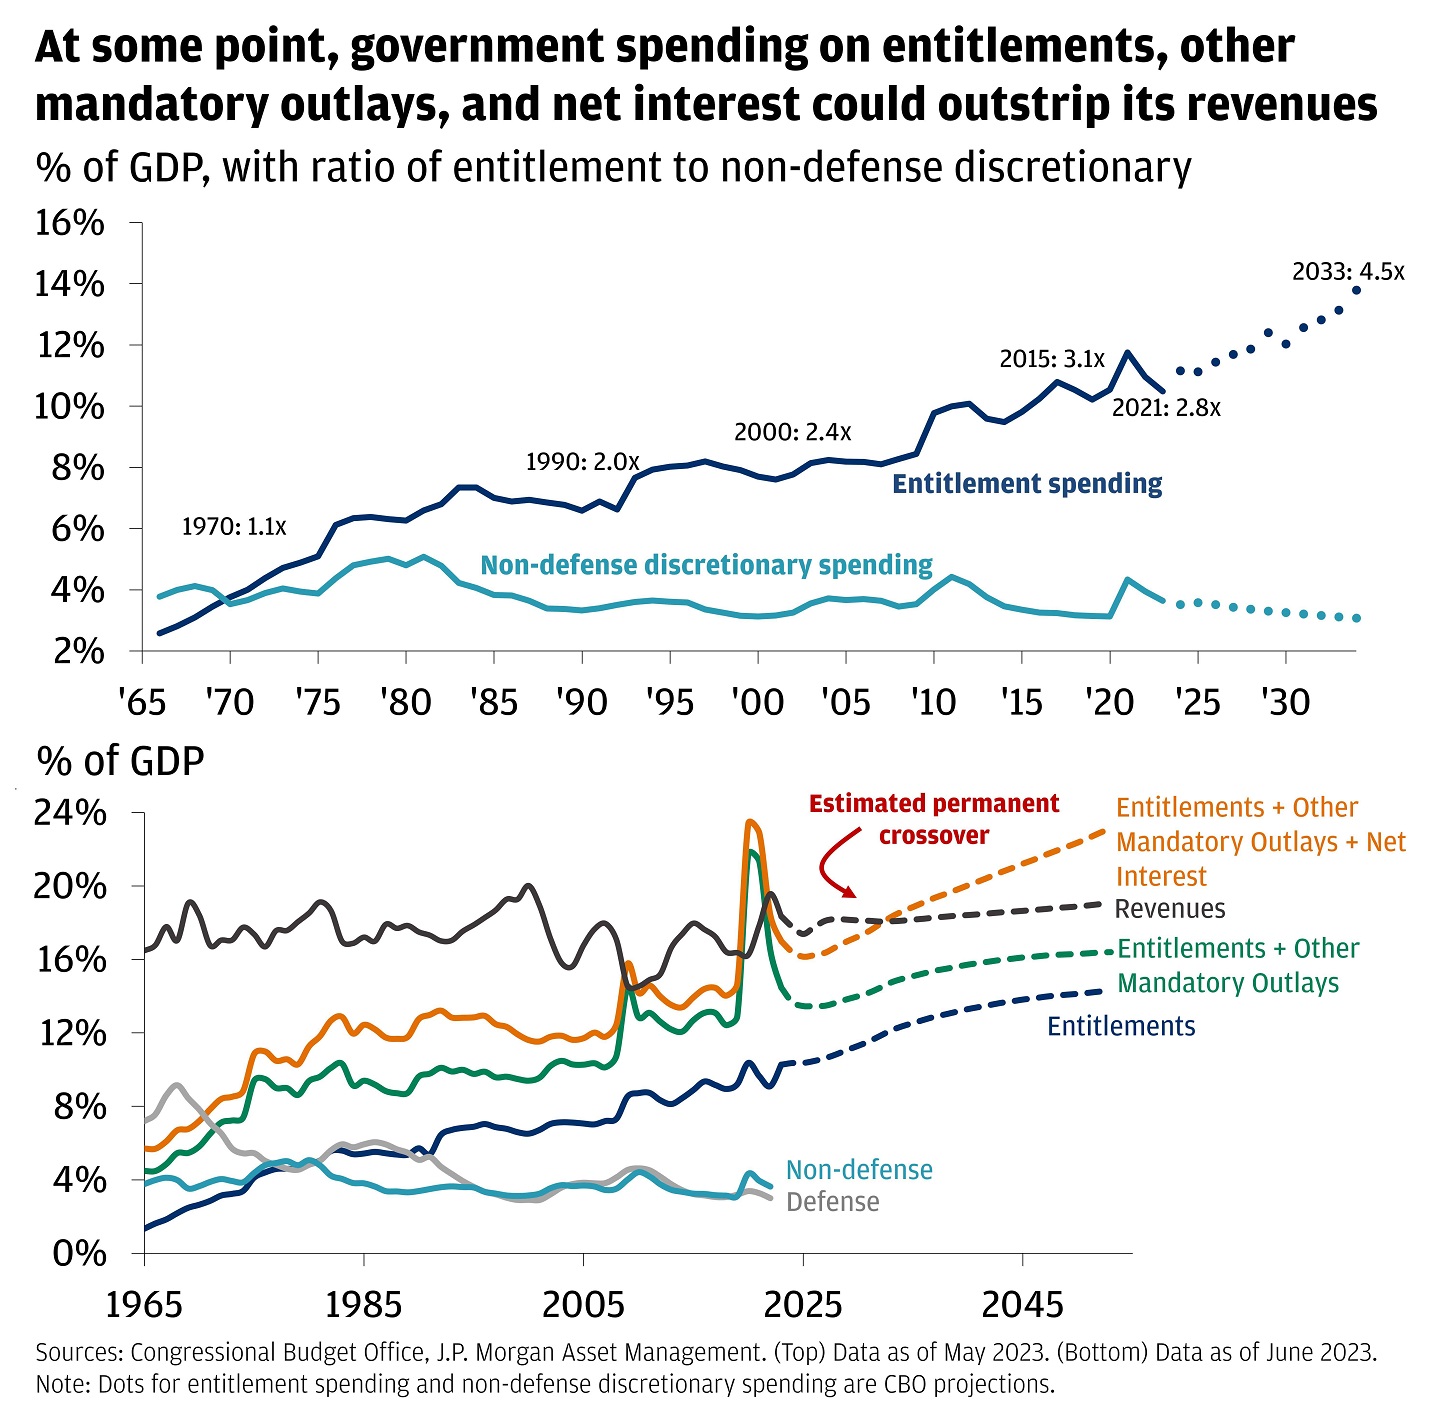 The top chart shows Entitlement spending and Non-defense discretionary spending from December 1965 to December 2033